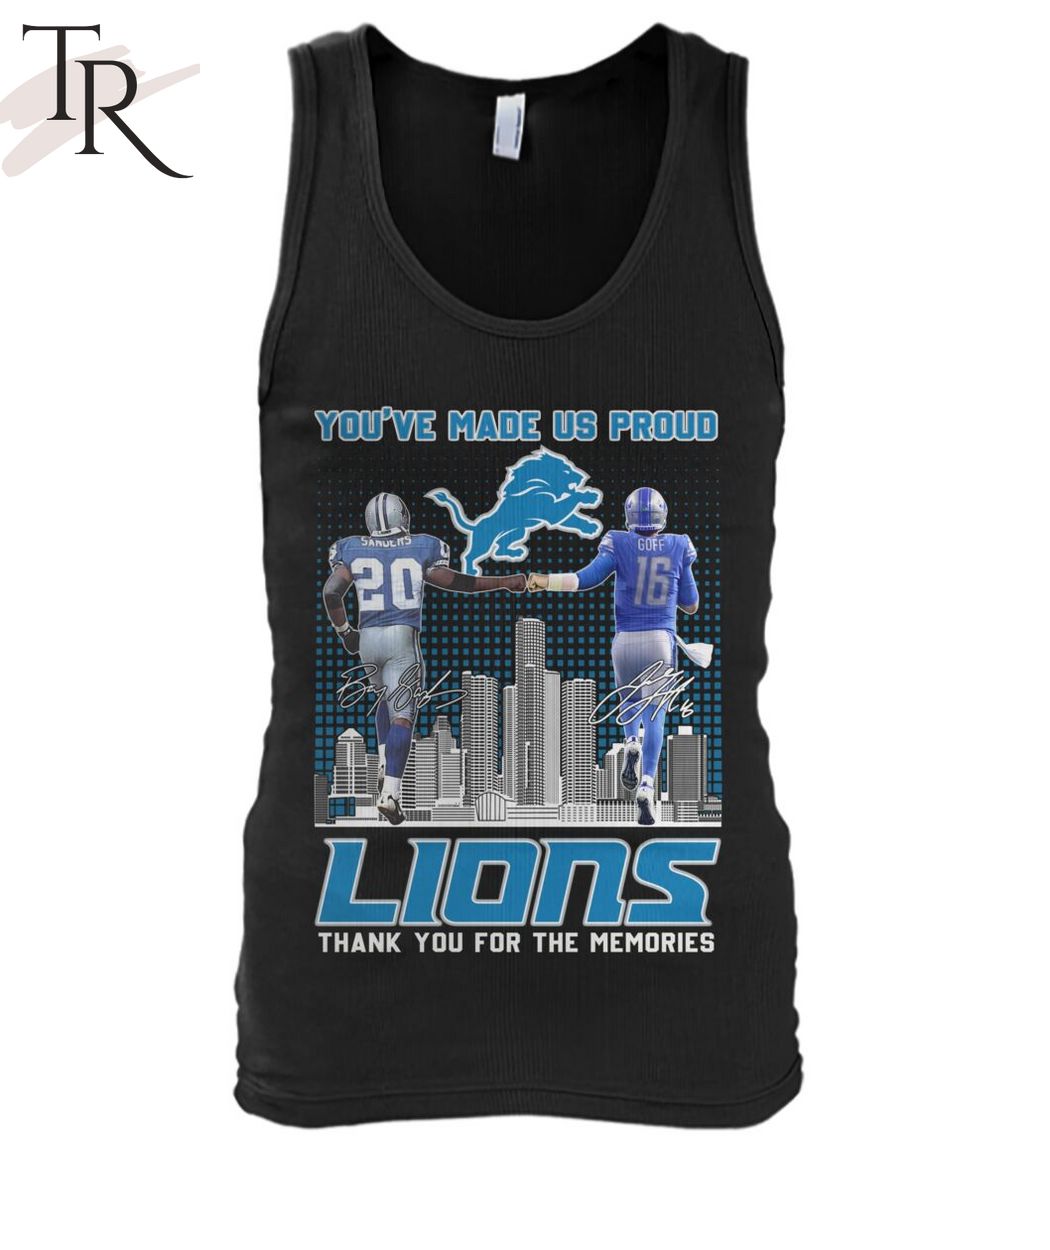 You've Made Us Proud Lions Thank You For The Memories T-Shirt